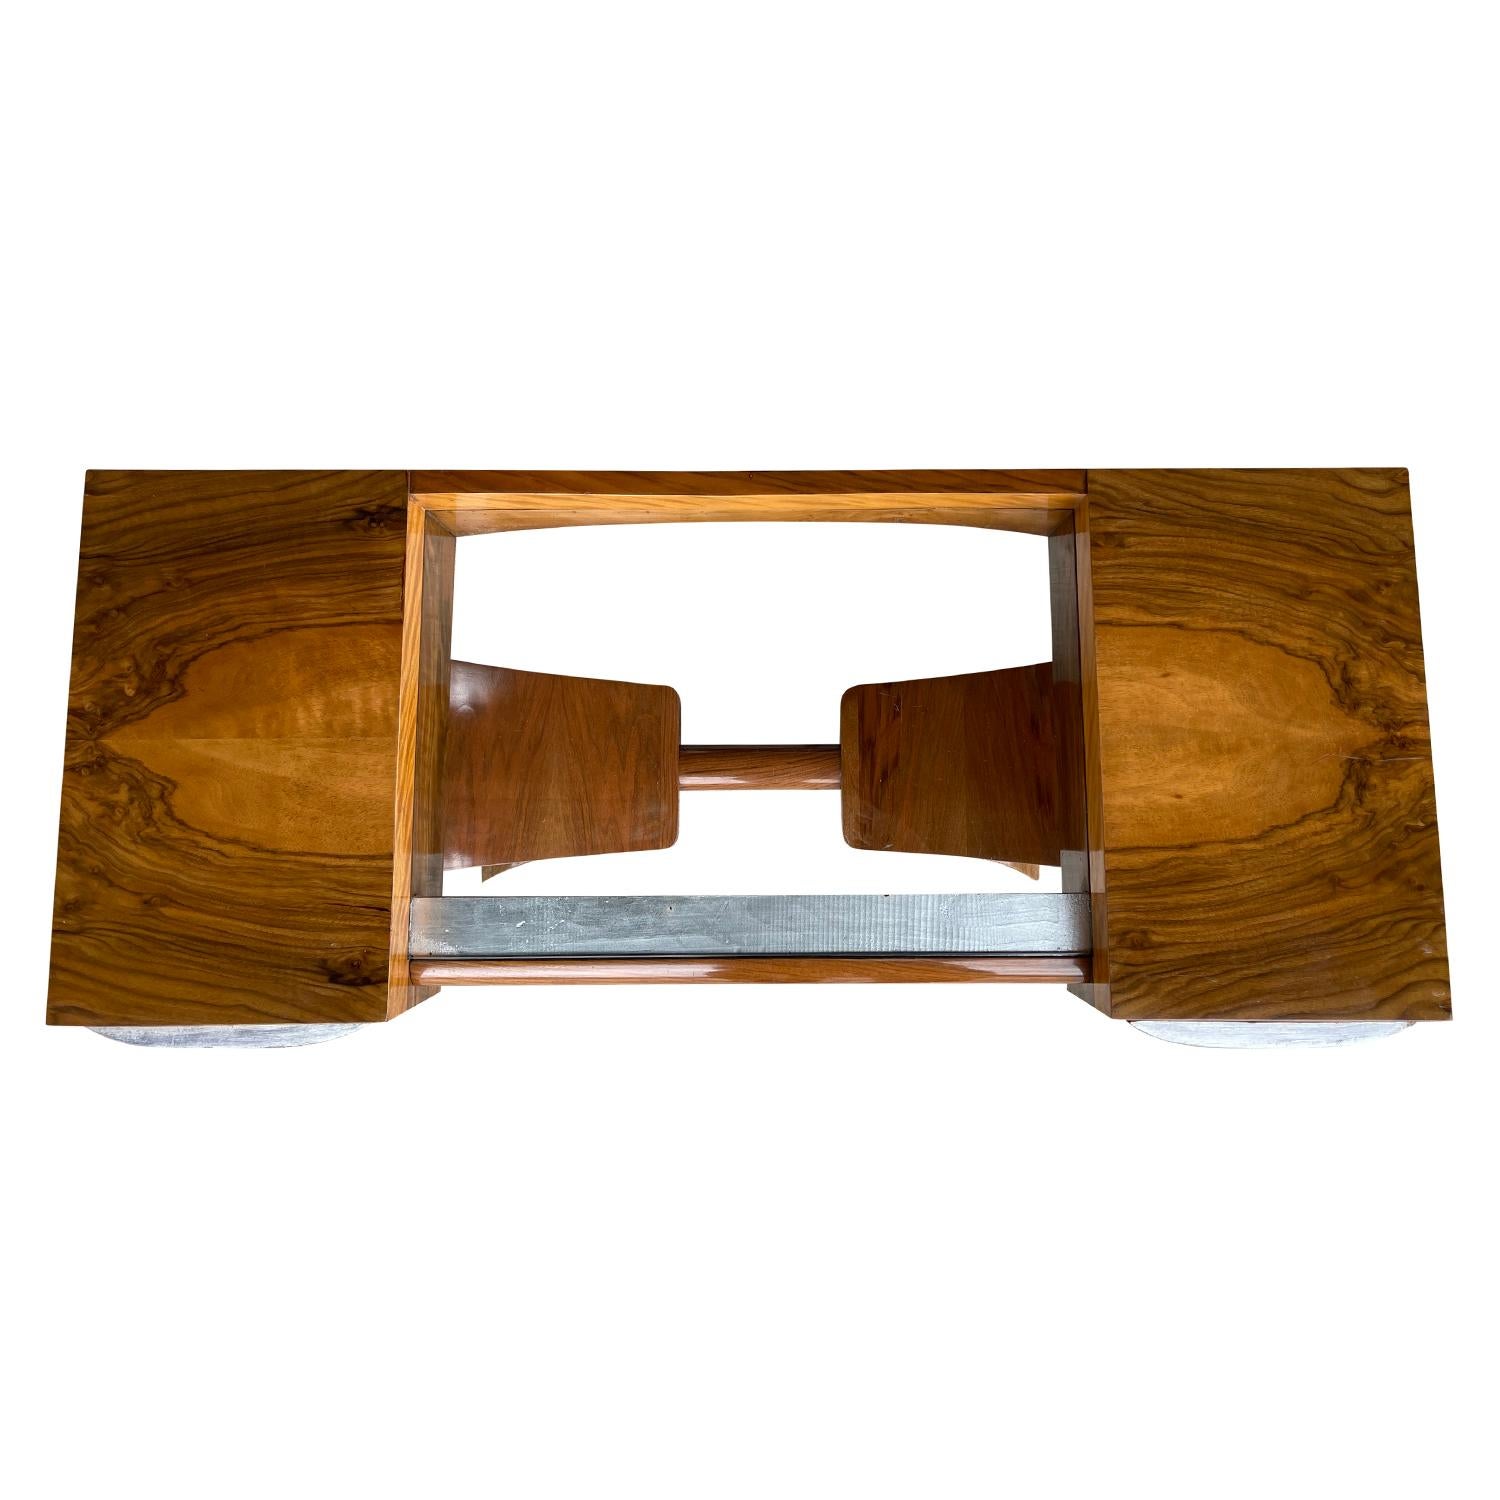 20th Century French Art Deco Walnut Coiffeuse Vanity by Émile-Jacques Ruhlmann For Sale 2